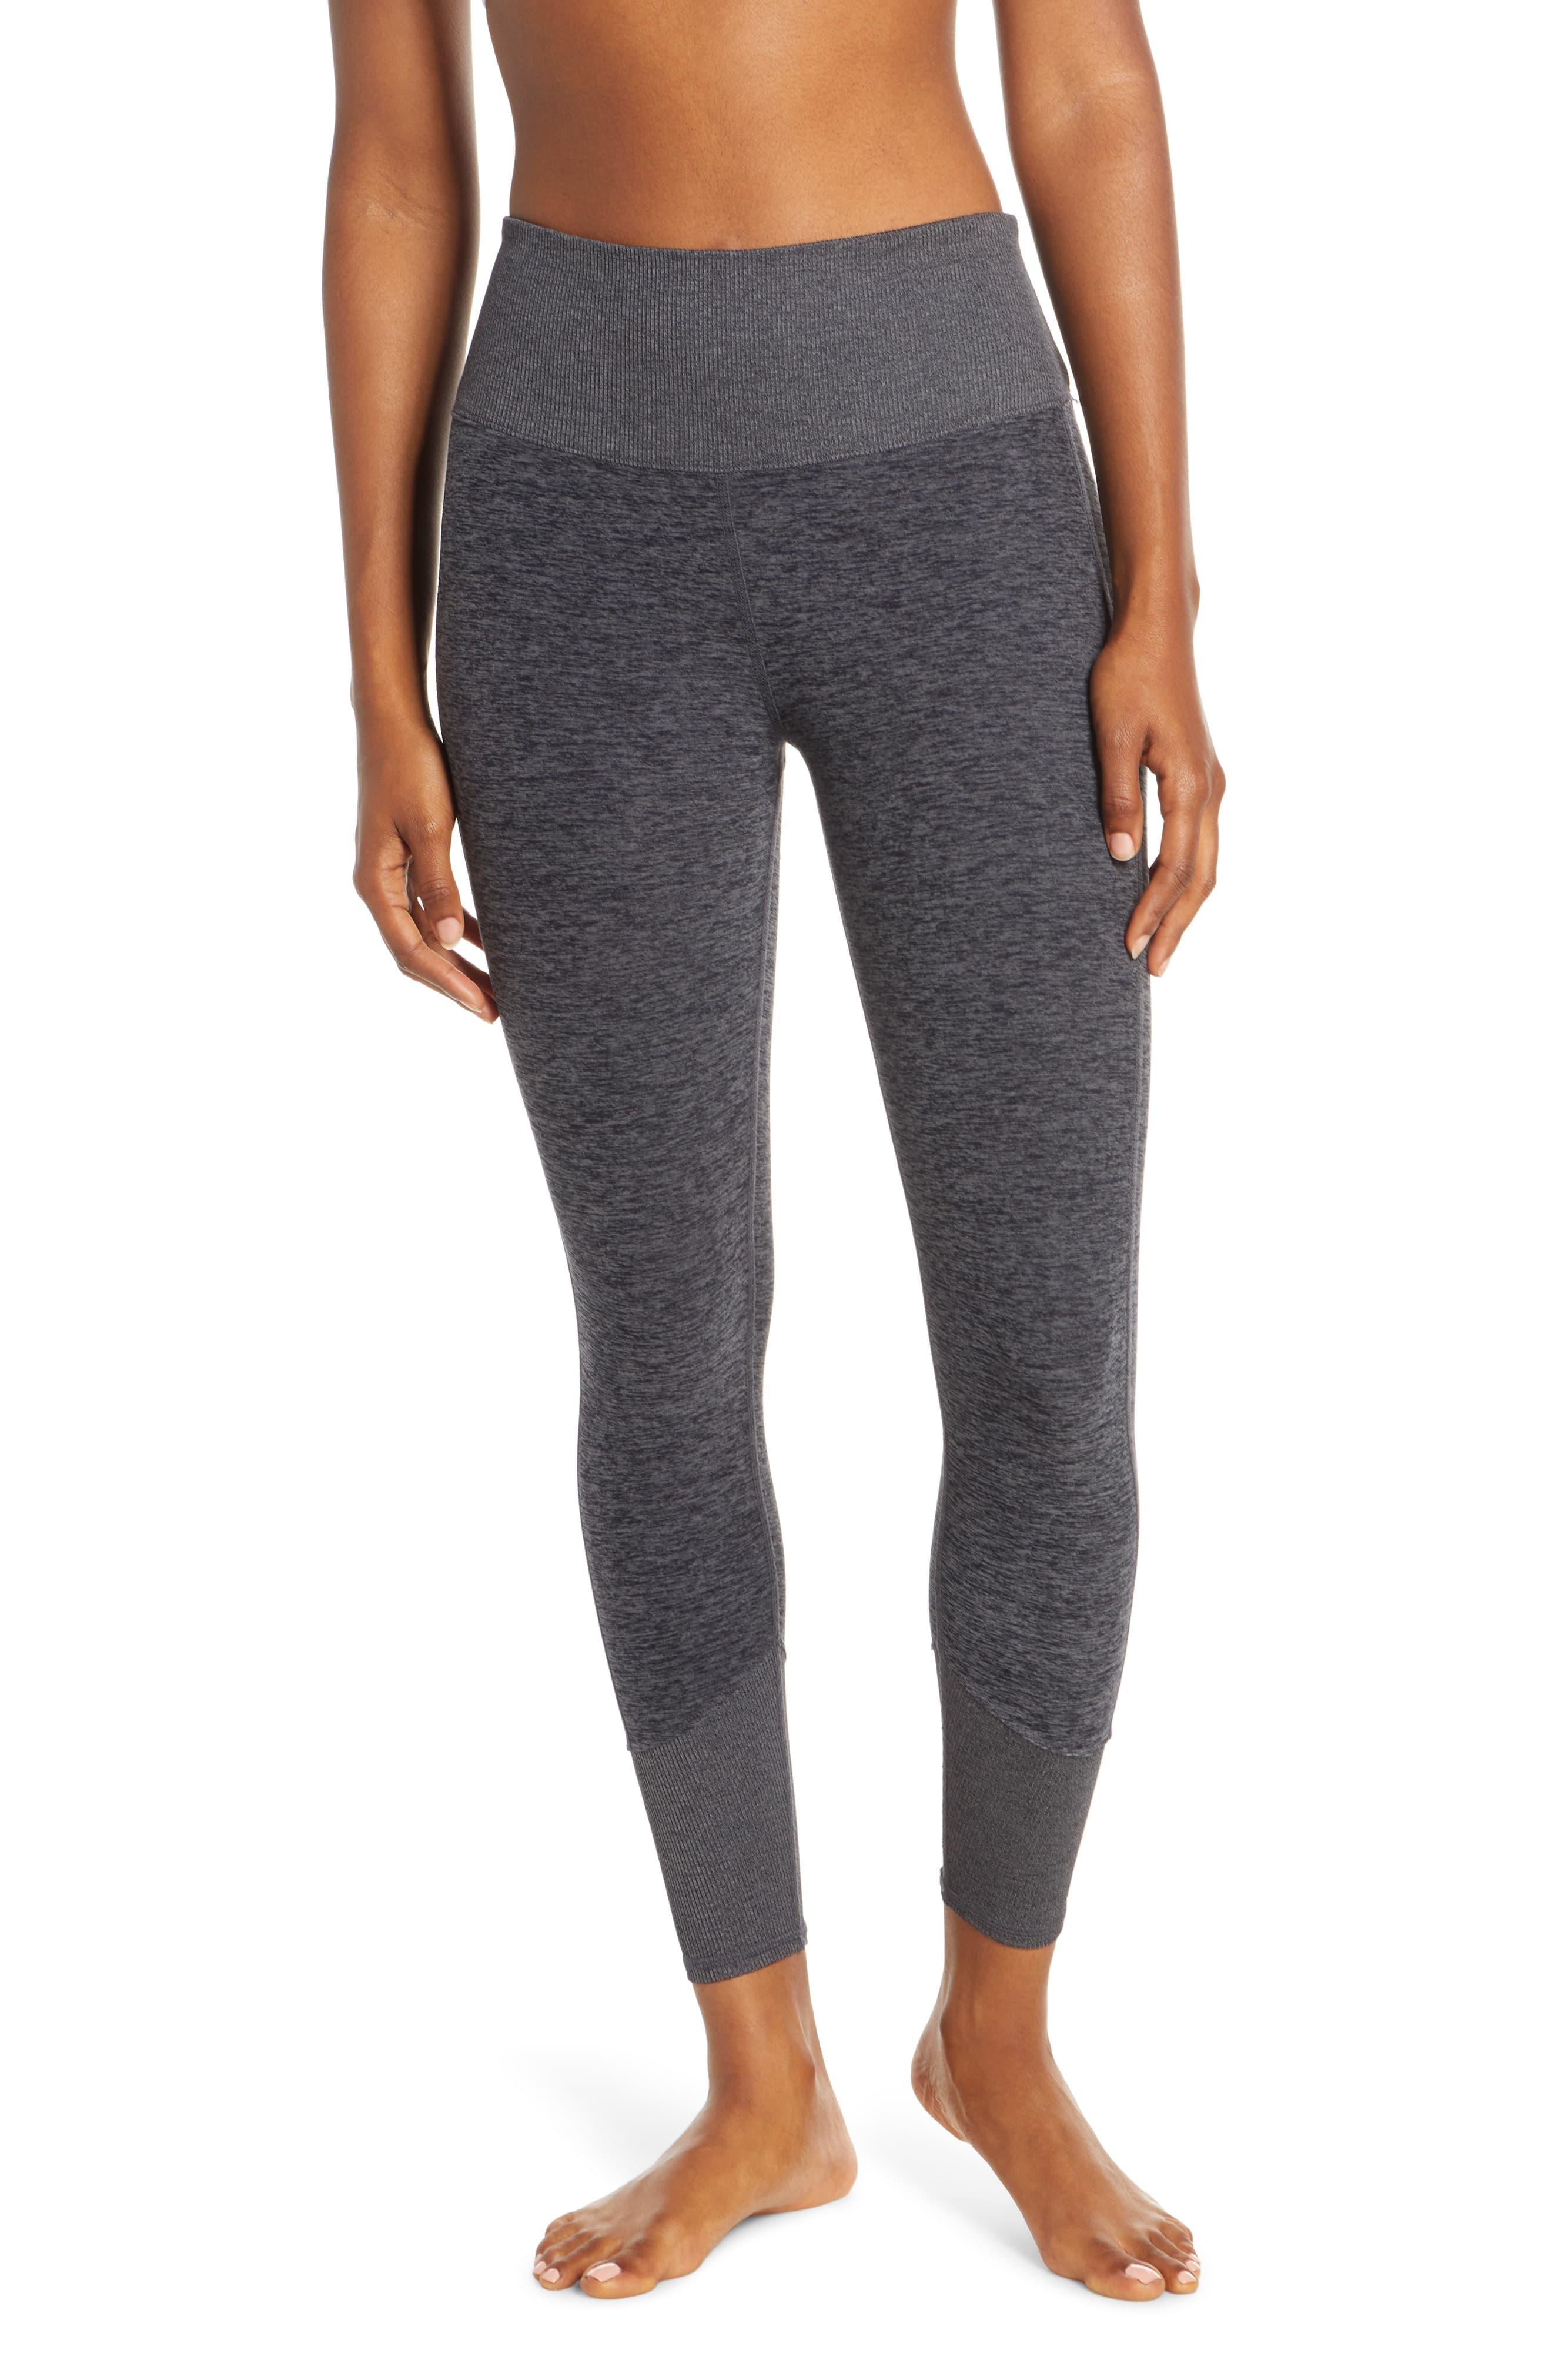 7/8 High-Waist Airbrush Legging in Steel Blue by Alo Yoga - Work Well Daily